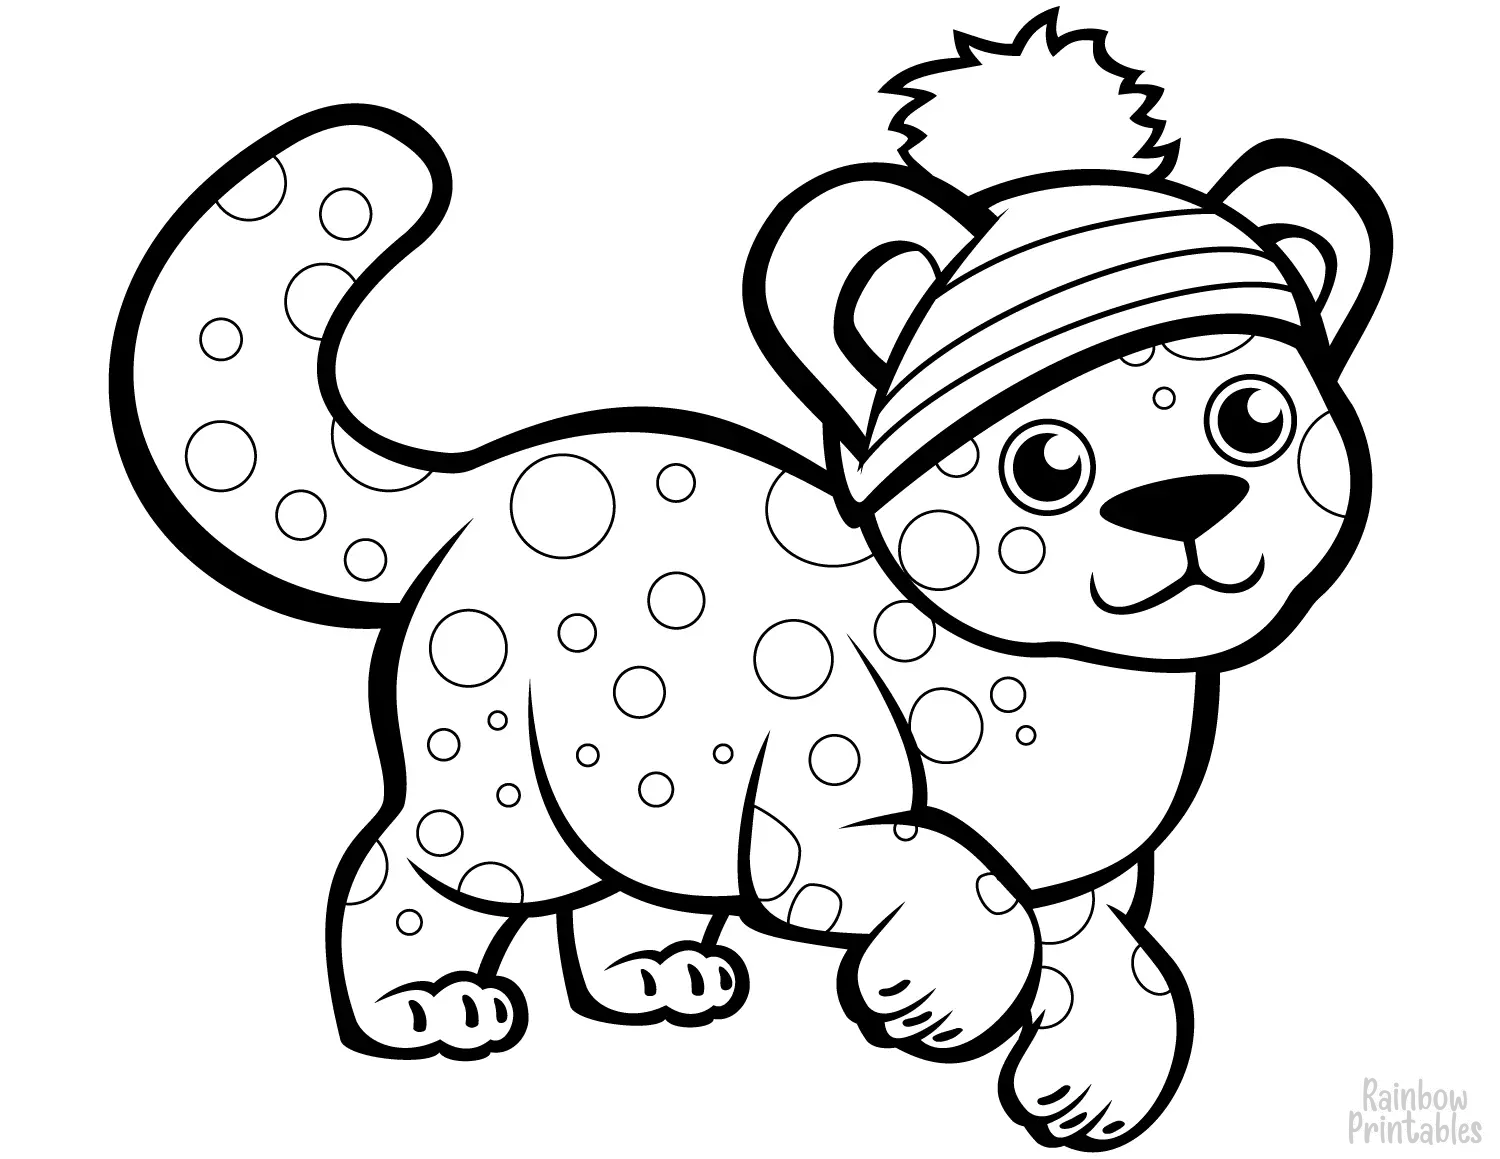 Free-cute-cheetah-in-winter-hat-coloring-page-for-kids-rainy-day-activities